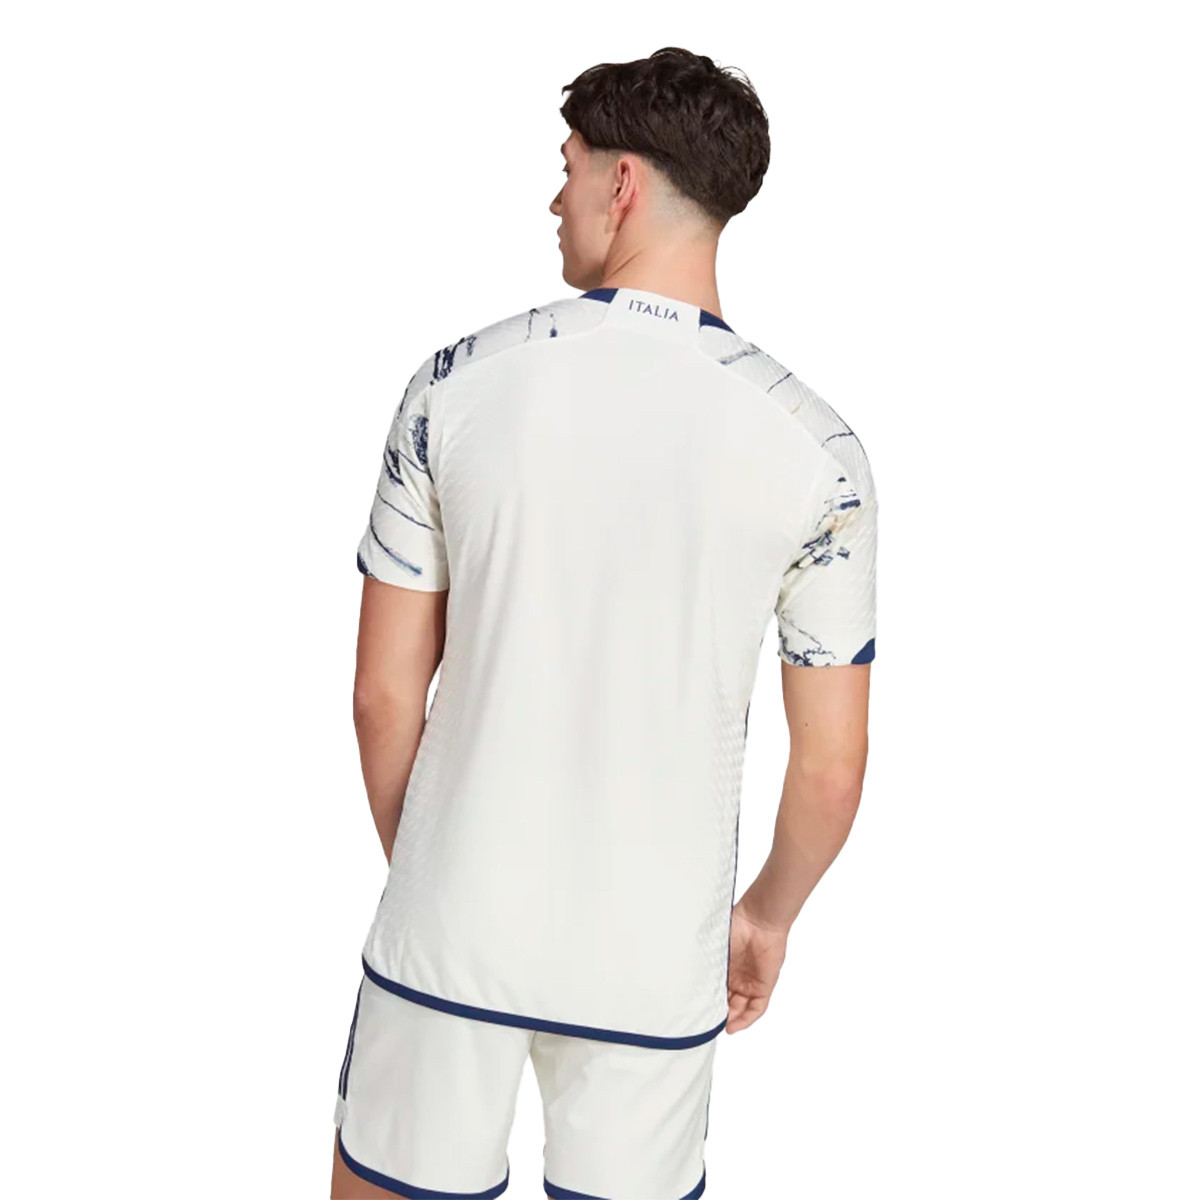 Adidas 2023 Italy Home Jersey - Blue, S